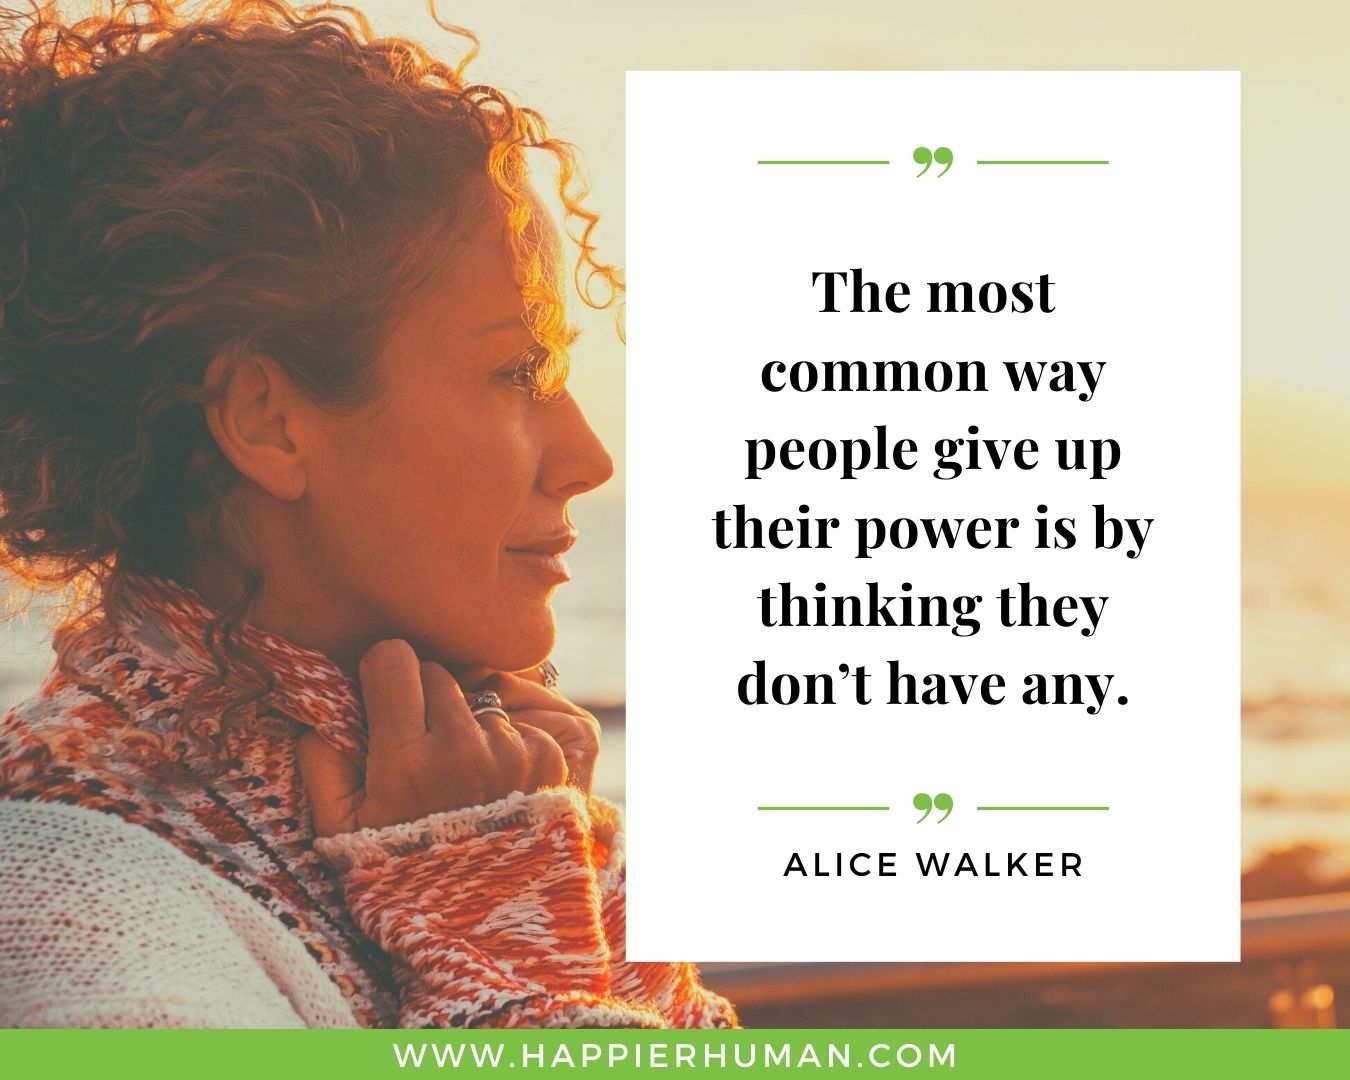 Positive Energy Quotes - “The most common way people give up their power is by thinking they don’t have any.” - Alice Walker